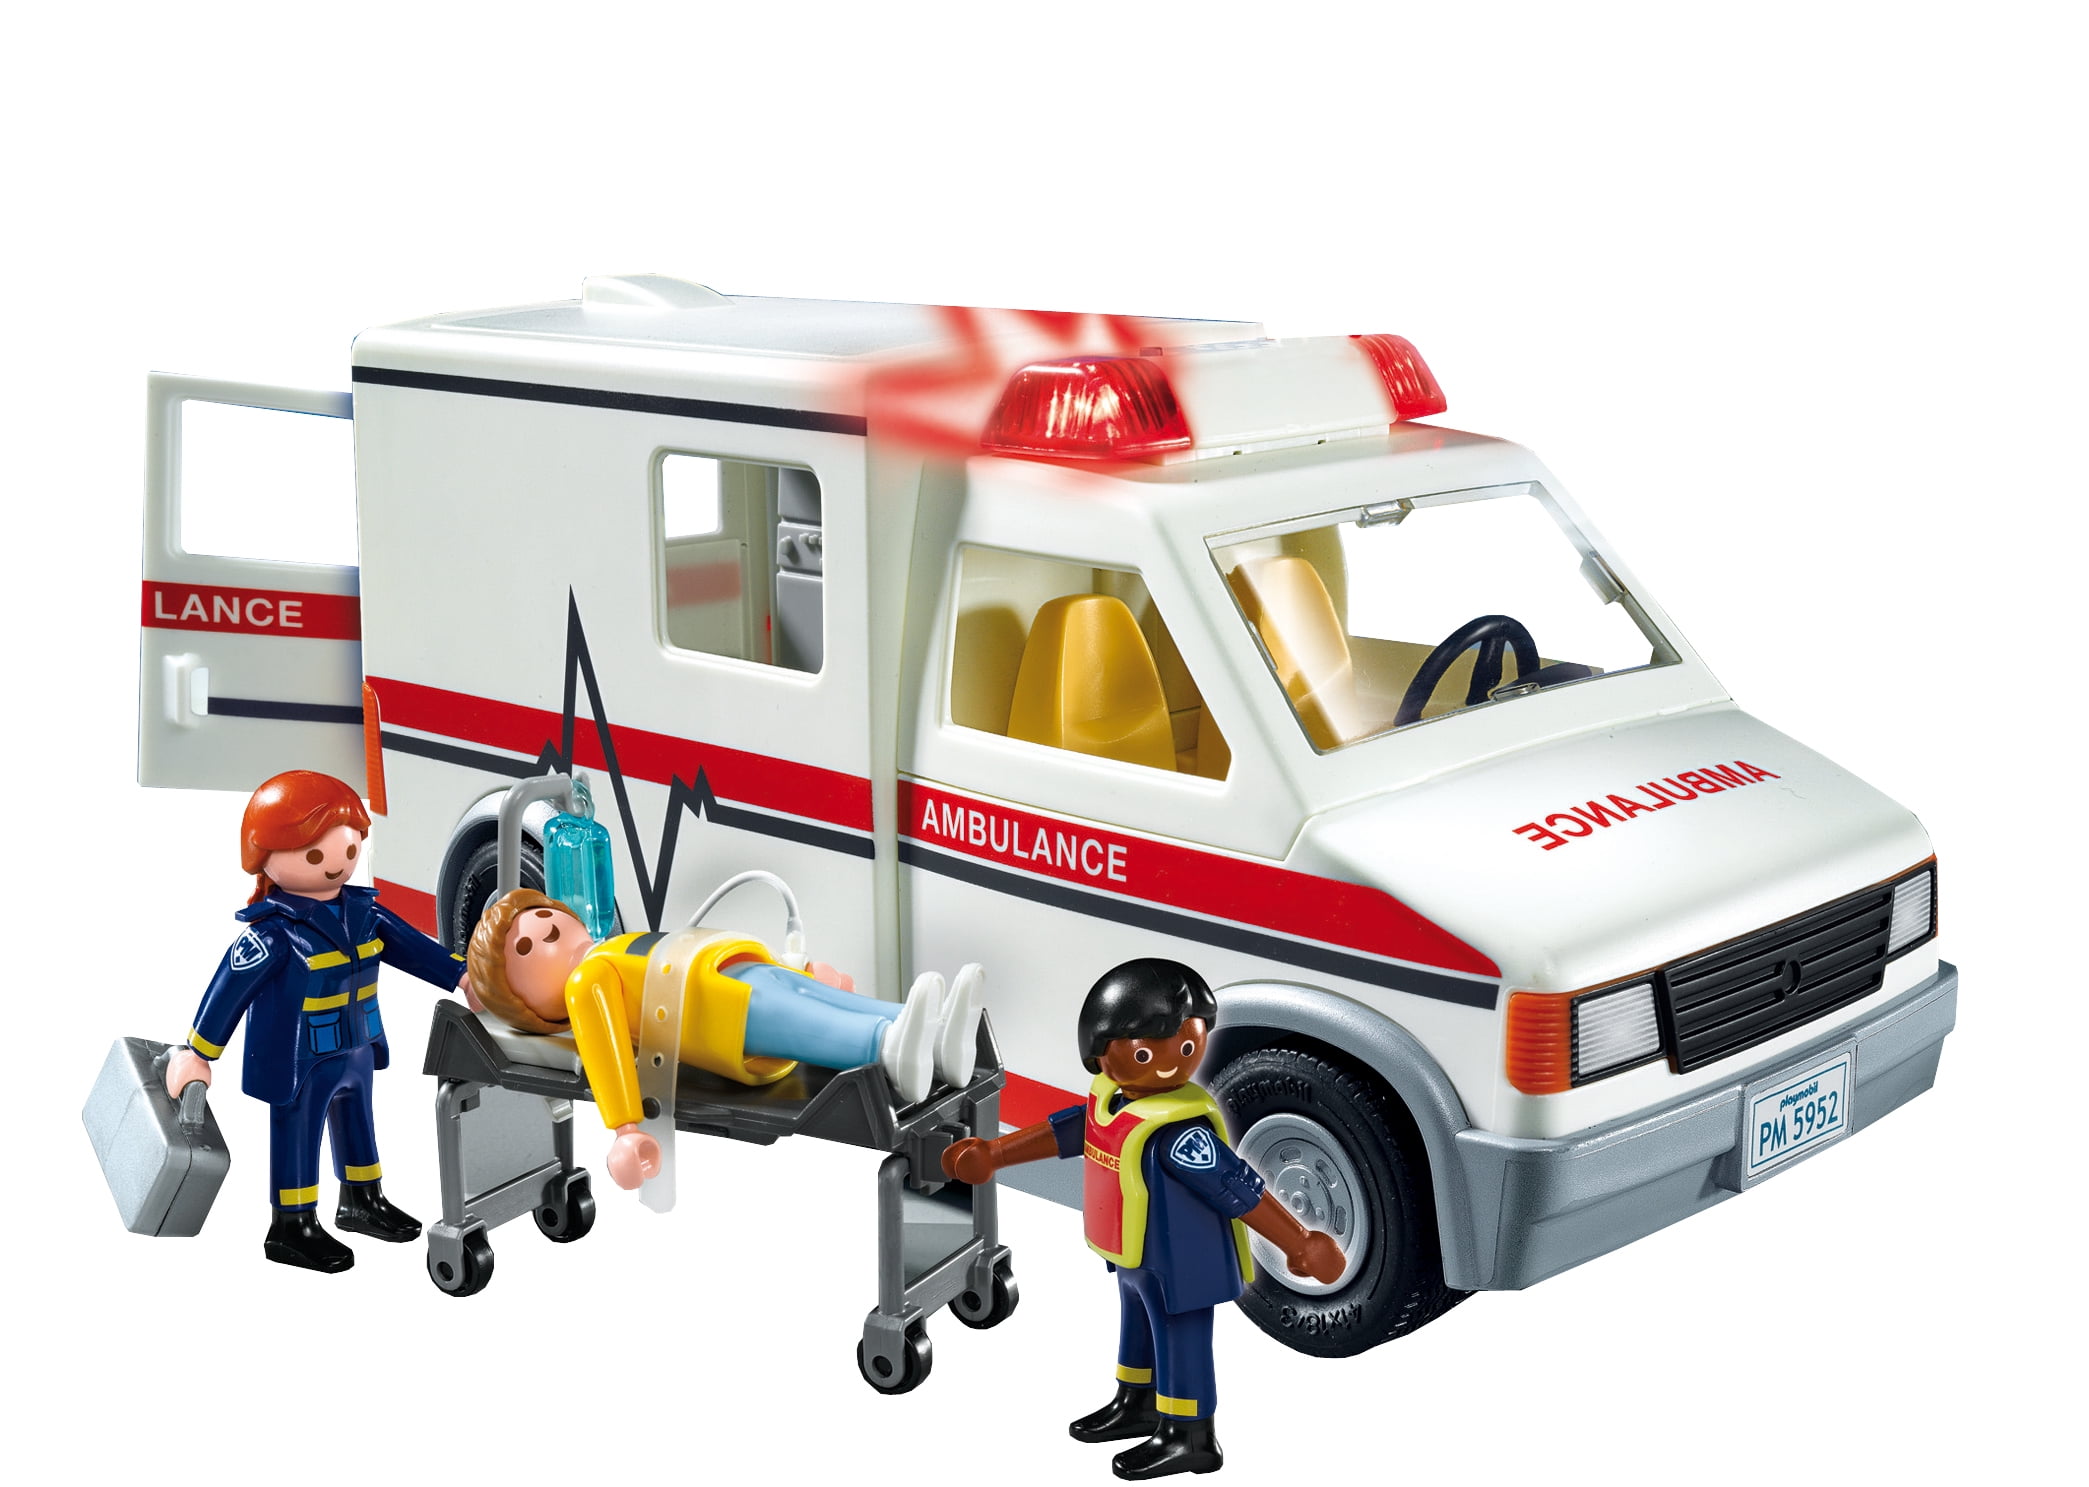 Ambulancia Playmobil Sale, UP TO 57% OFF www.apmusicales.com